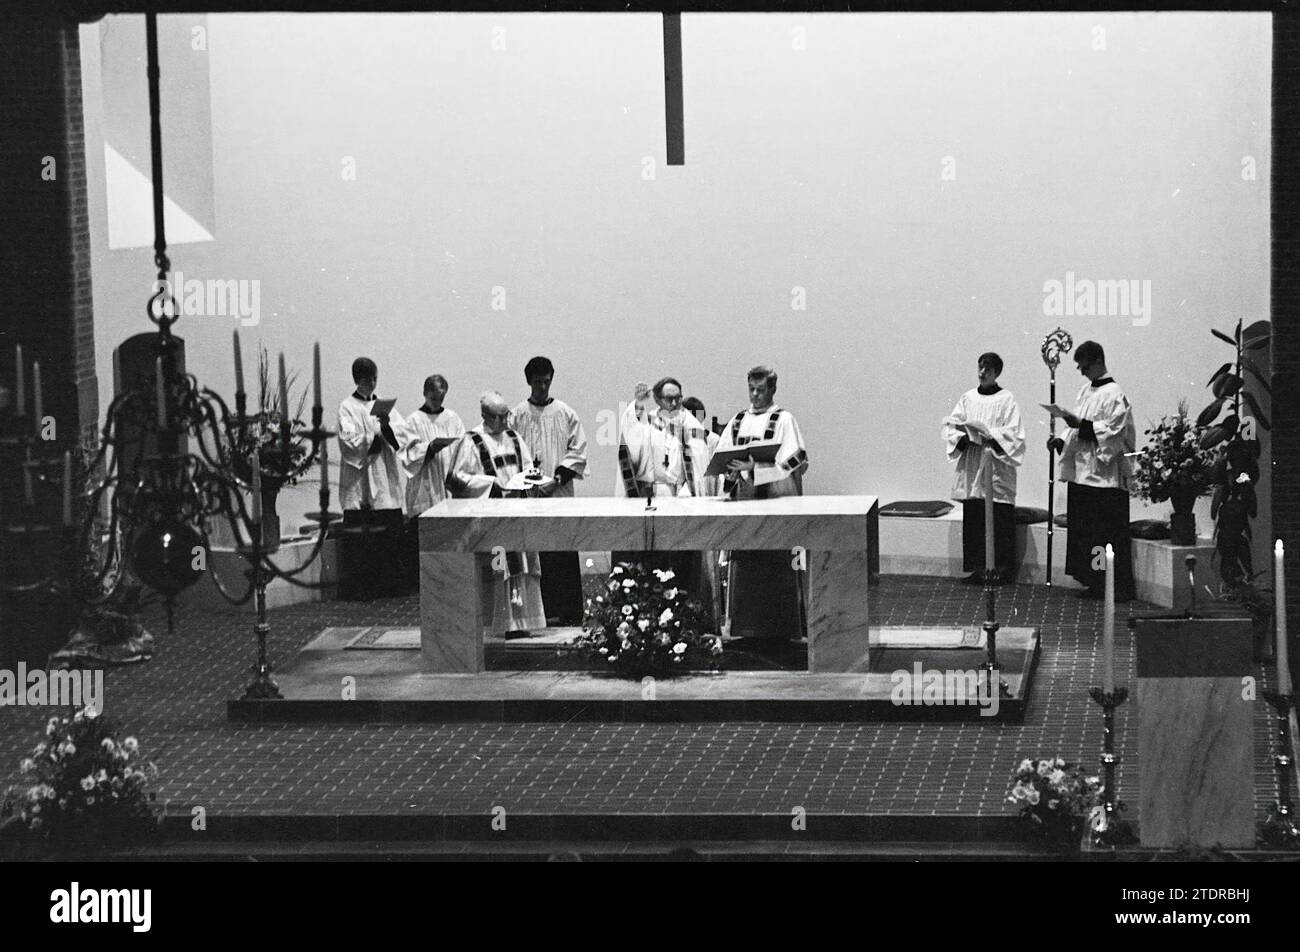 Dedication of altar Old Catholic Church IJmuiden, Dedication, Churches other than Roman Catholic, 12-12-1967, Whizgle News from the Past, Tailored for the Future. Explore historical narratives, Dutch The Netherlands agency image with a modern perspective, bridging the gap between yesterday's events and tomorrow's insights. A timeless journey shaping the stories that shape our future Stock Photo